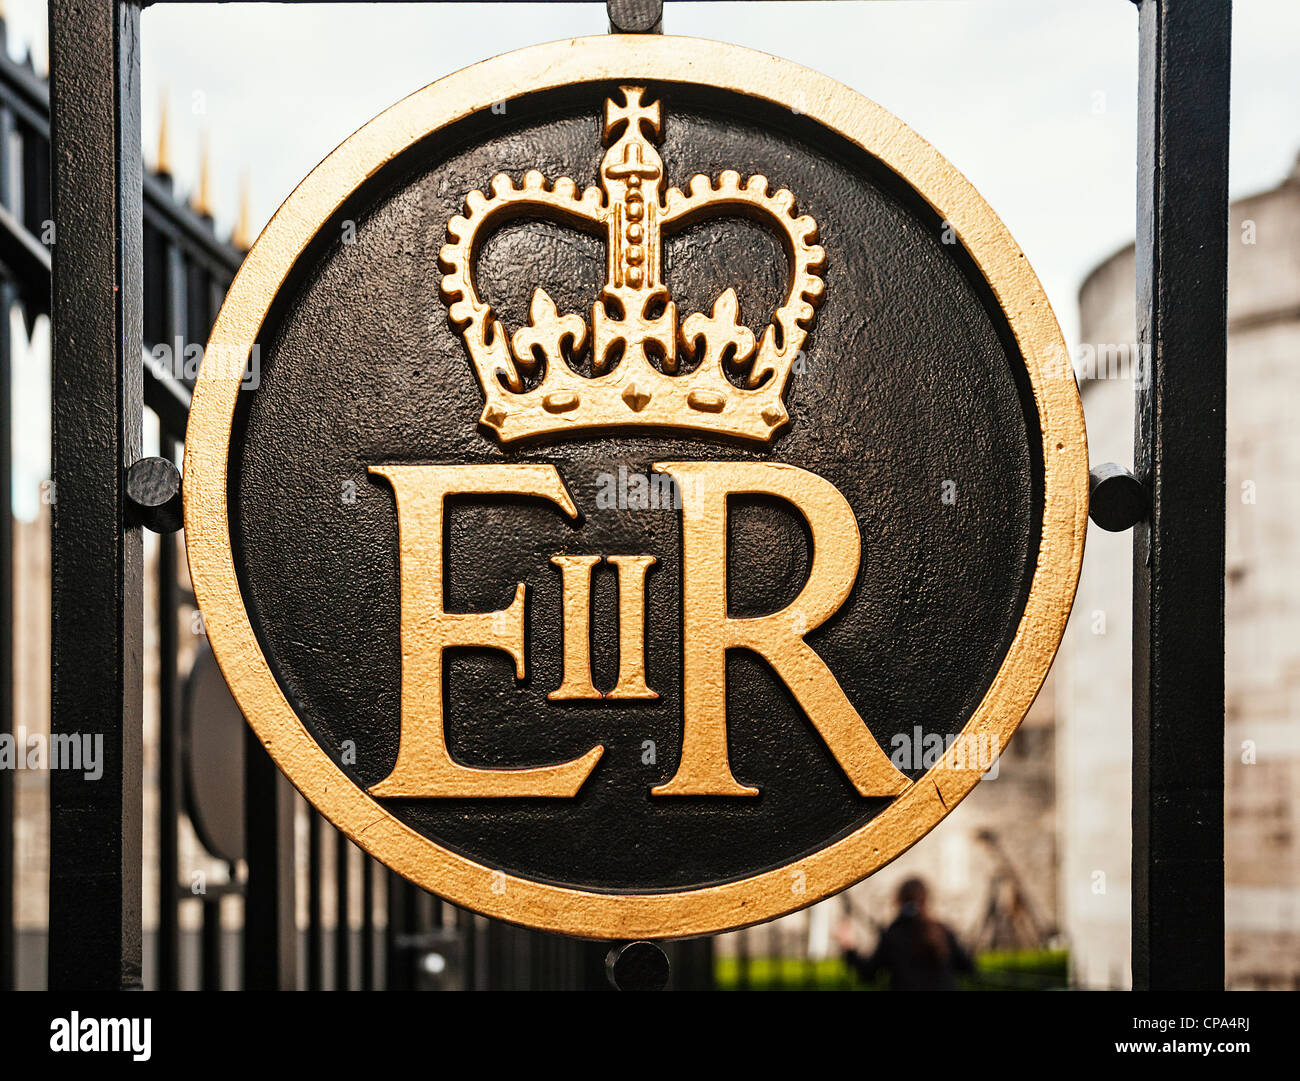 What's the meaning of 'ER' and what will be the symbol of King